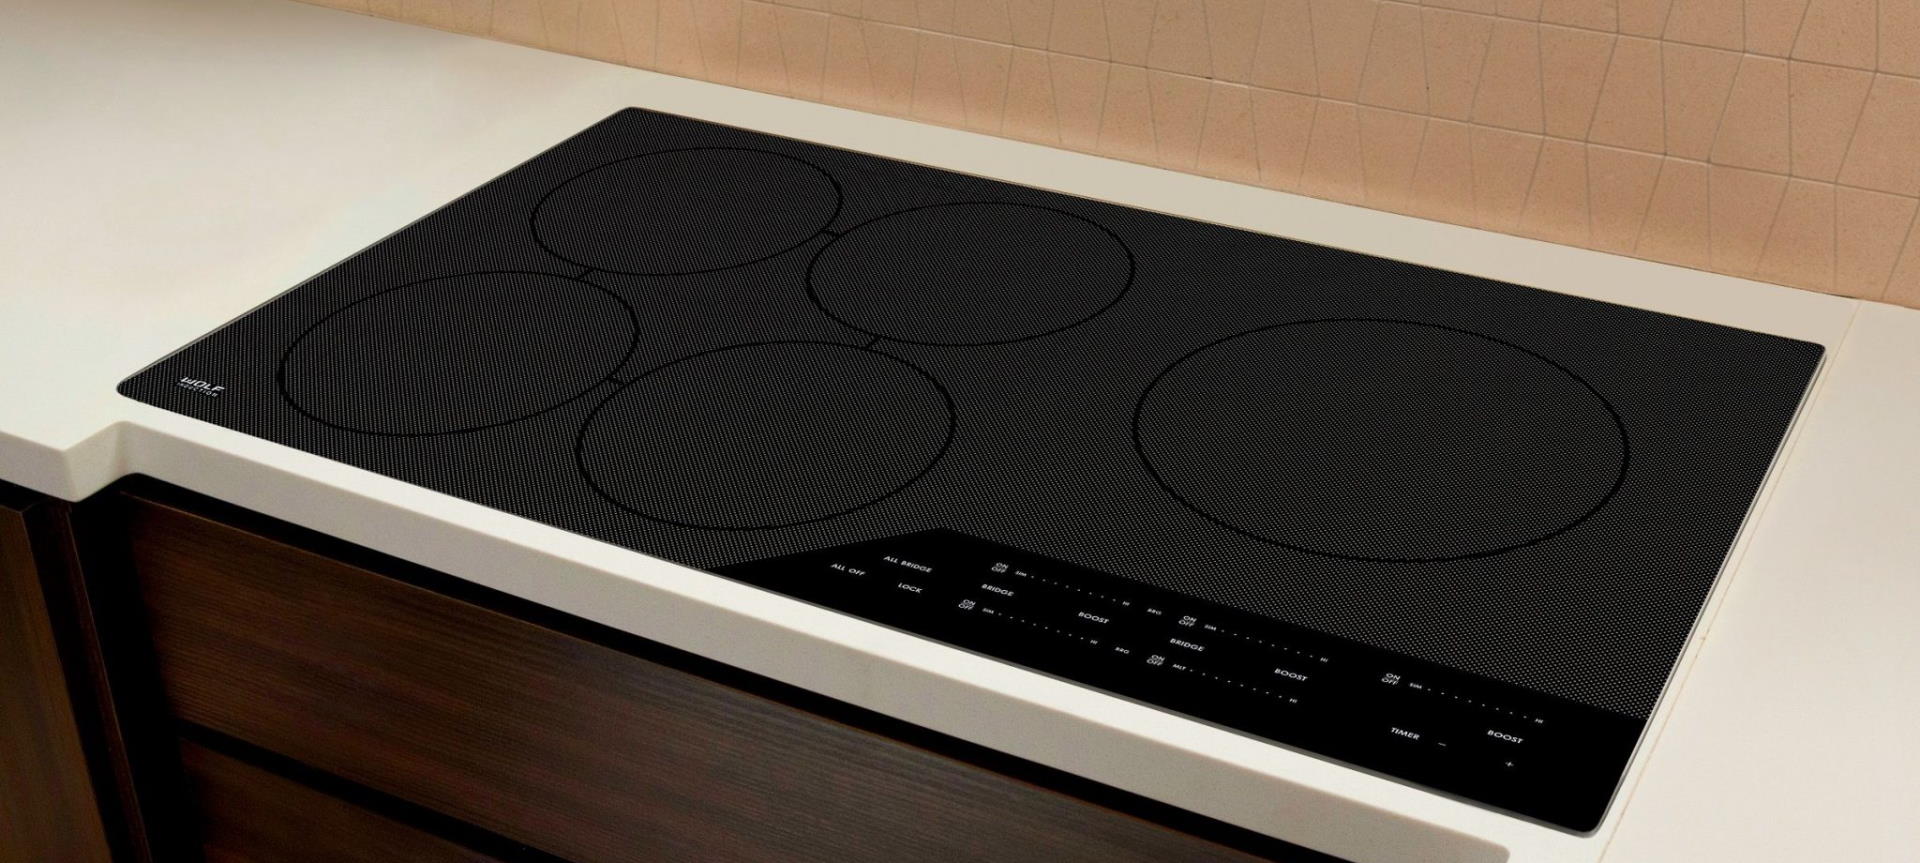 Wolf Induction Cooktops